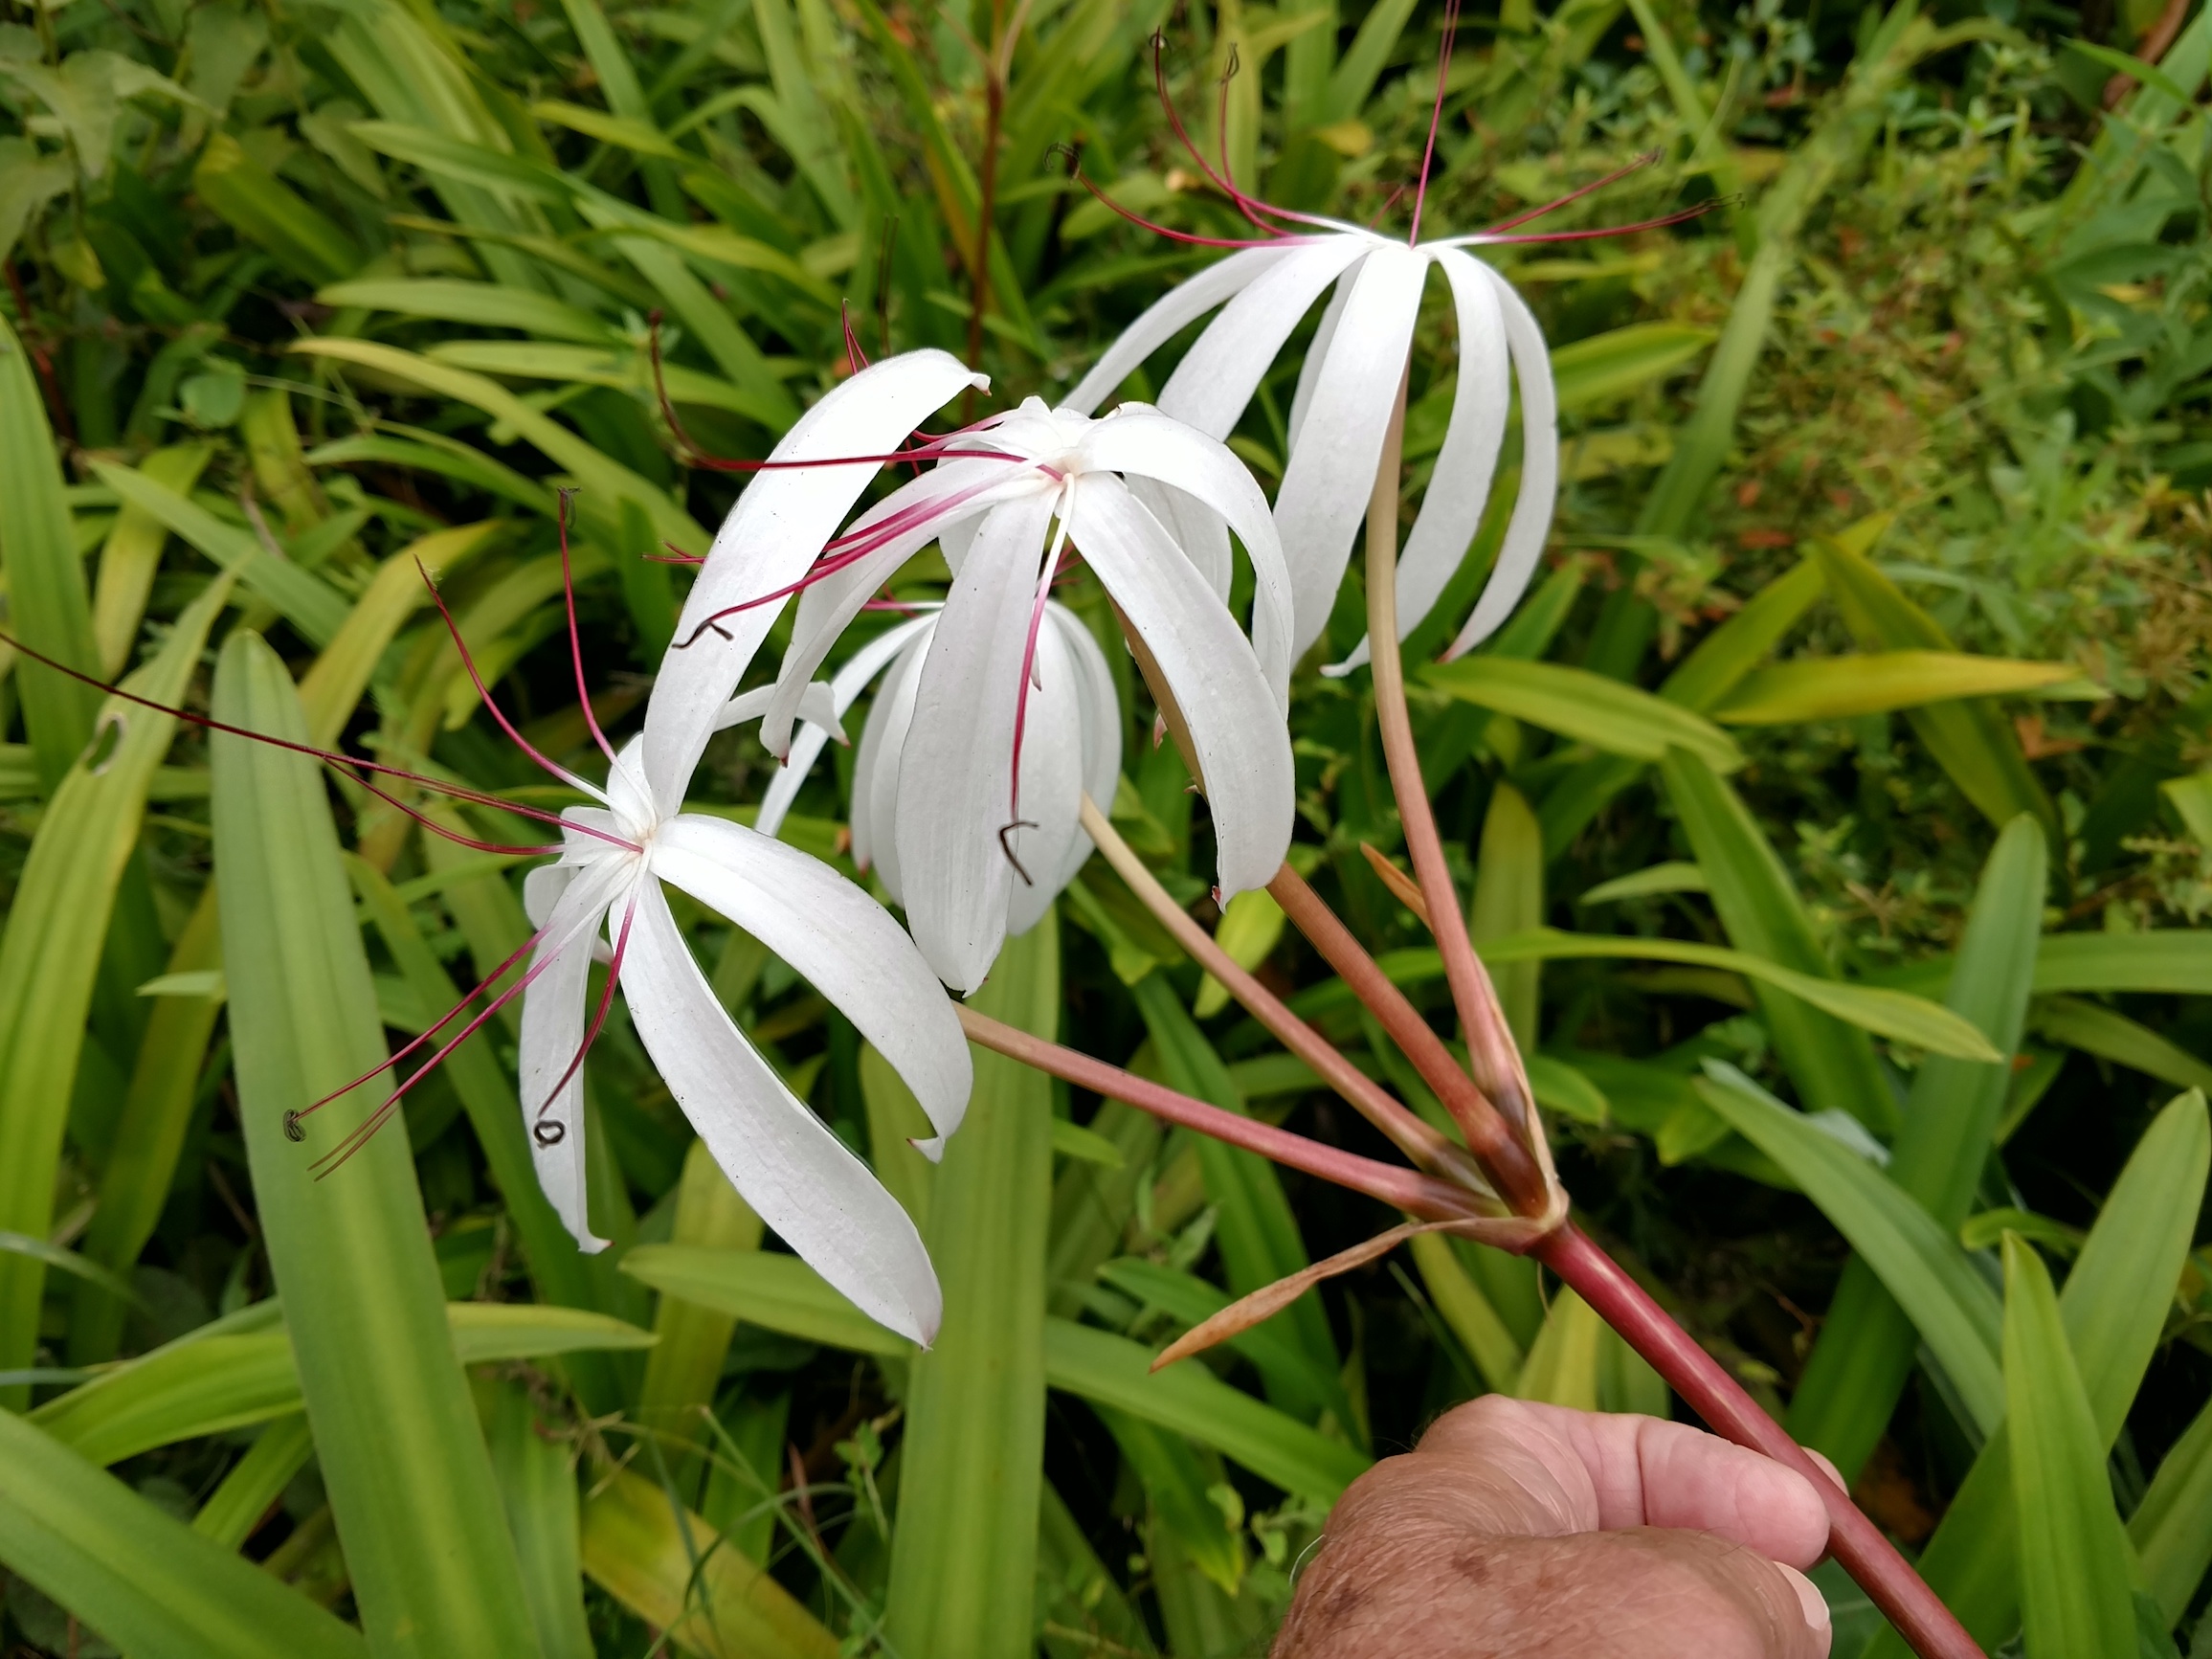 The Scientific Name is Crinum americanum var. americanum. You will likely hear them called Swamp-lily, String-lily, Seven-sisters, American Crinum Lily, Southern Swamp Lily. This picture shows the An umbel of large white flowers with red filaments. of Crinum americanum var. americanum